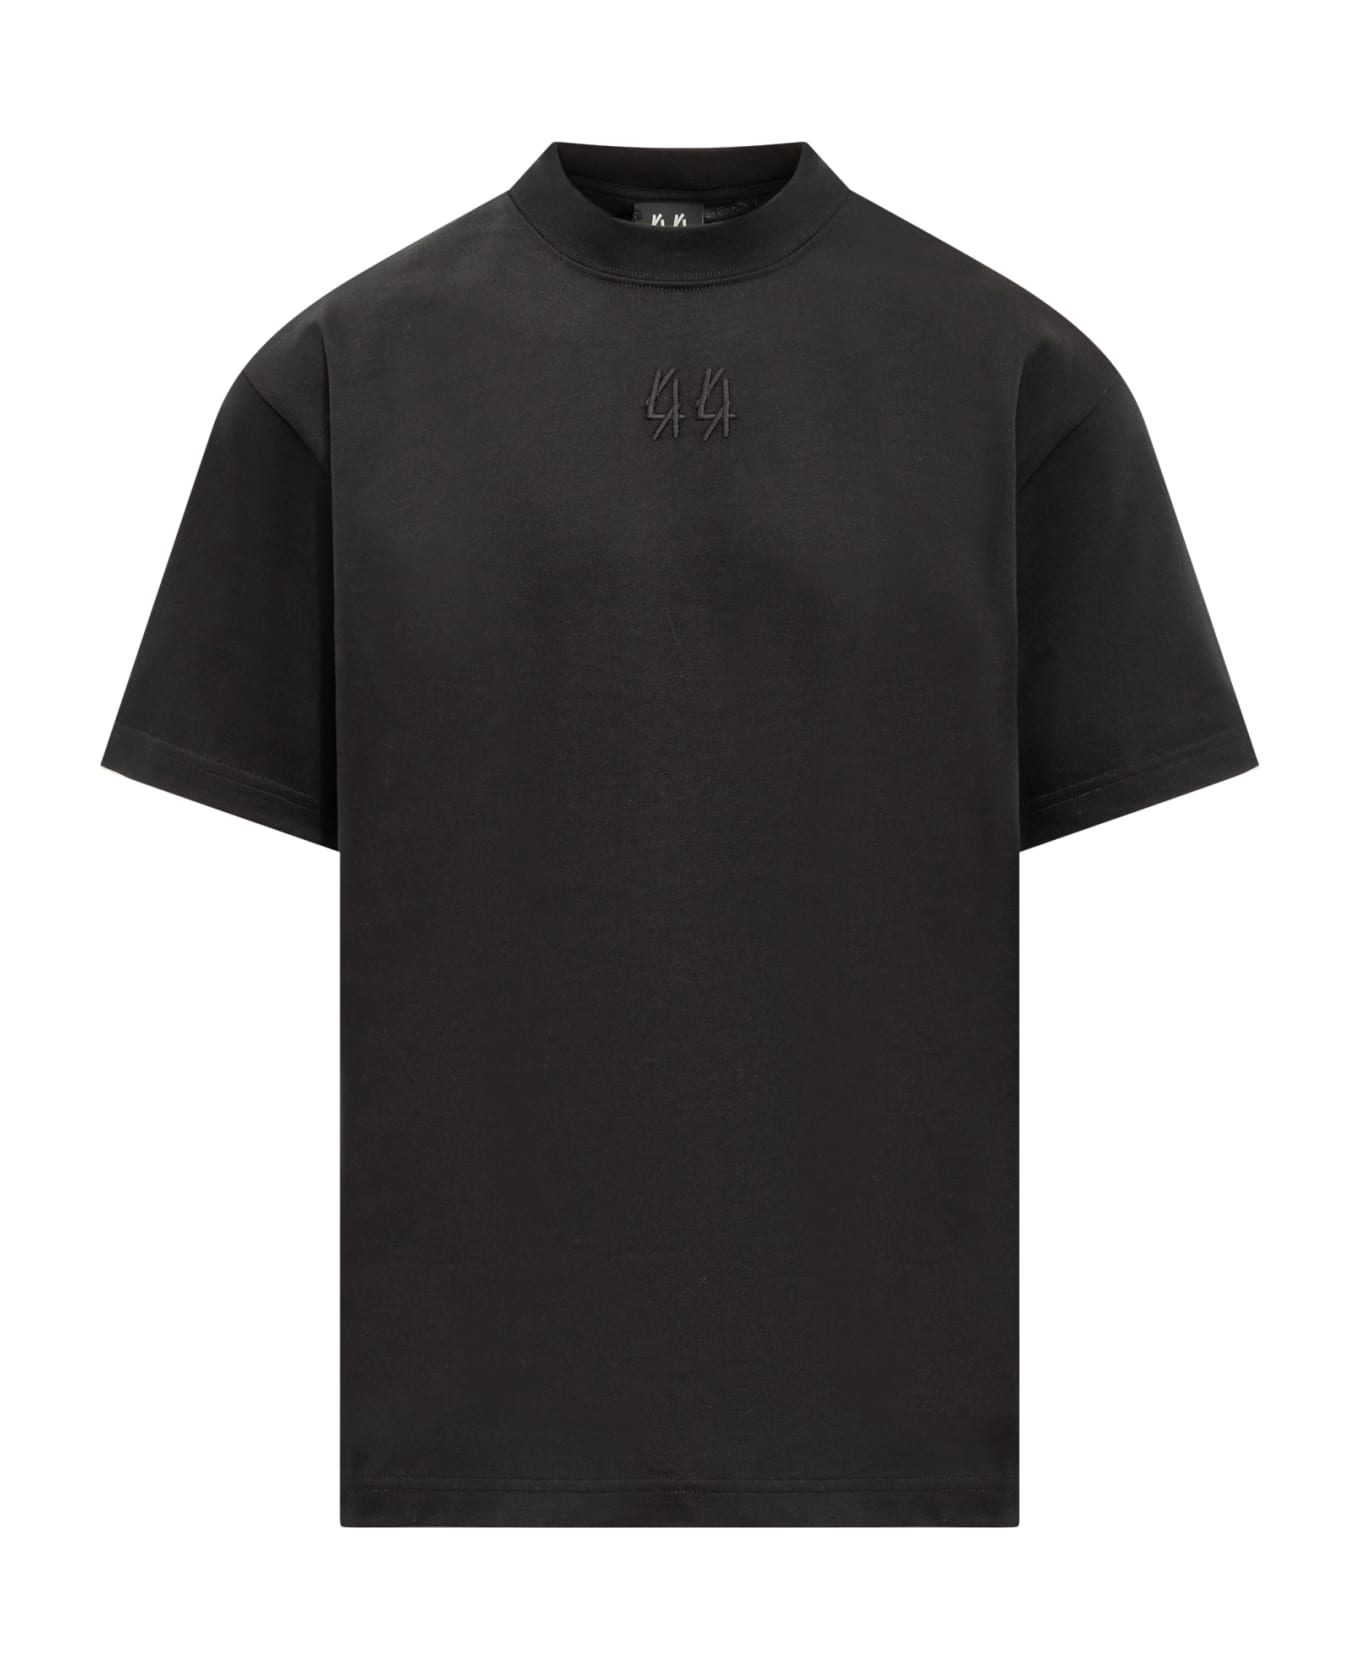 44 Label Group The Enemy T-shirt - BLACK-THE ENEMY PRINT シャツ